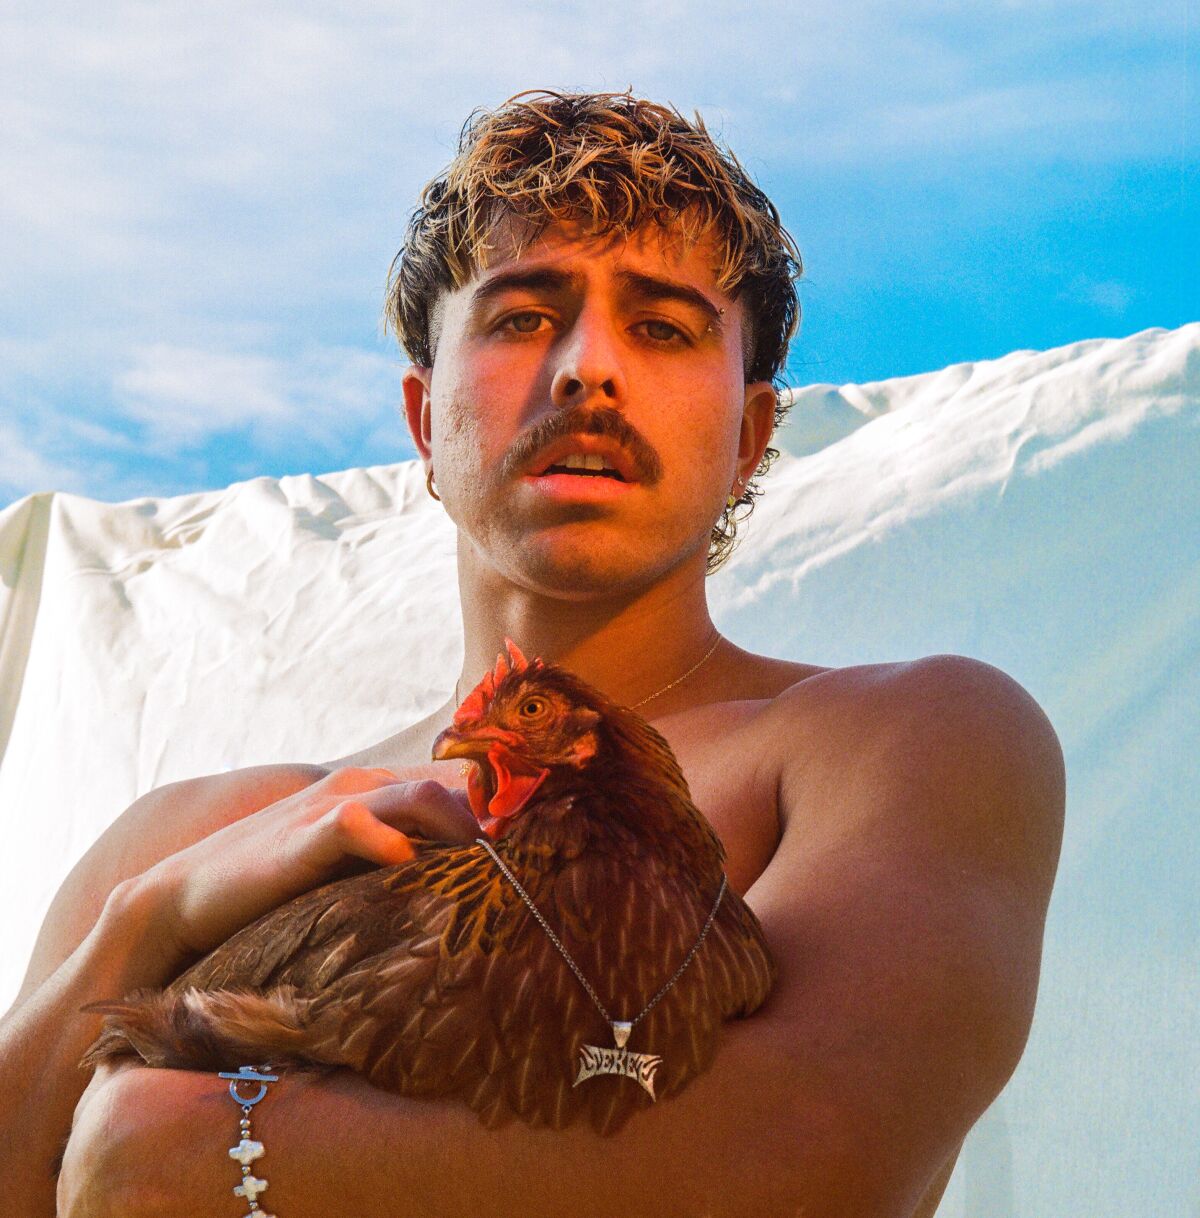 shirtless man holding a chicken with a necklace on